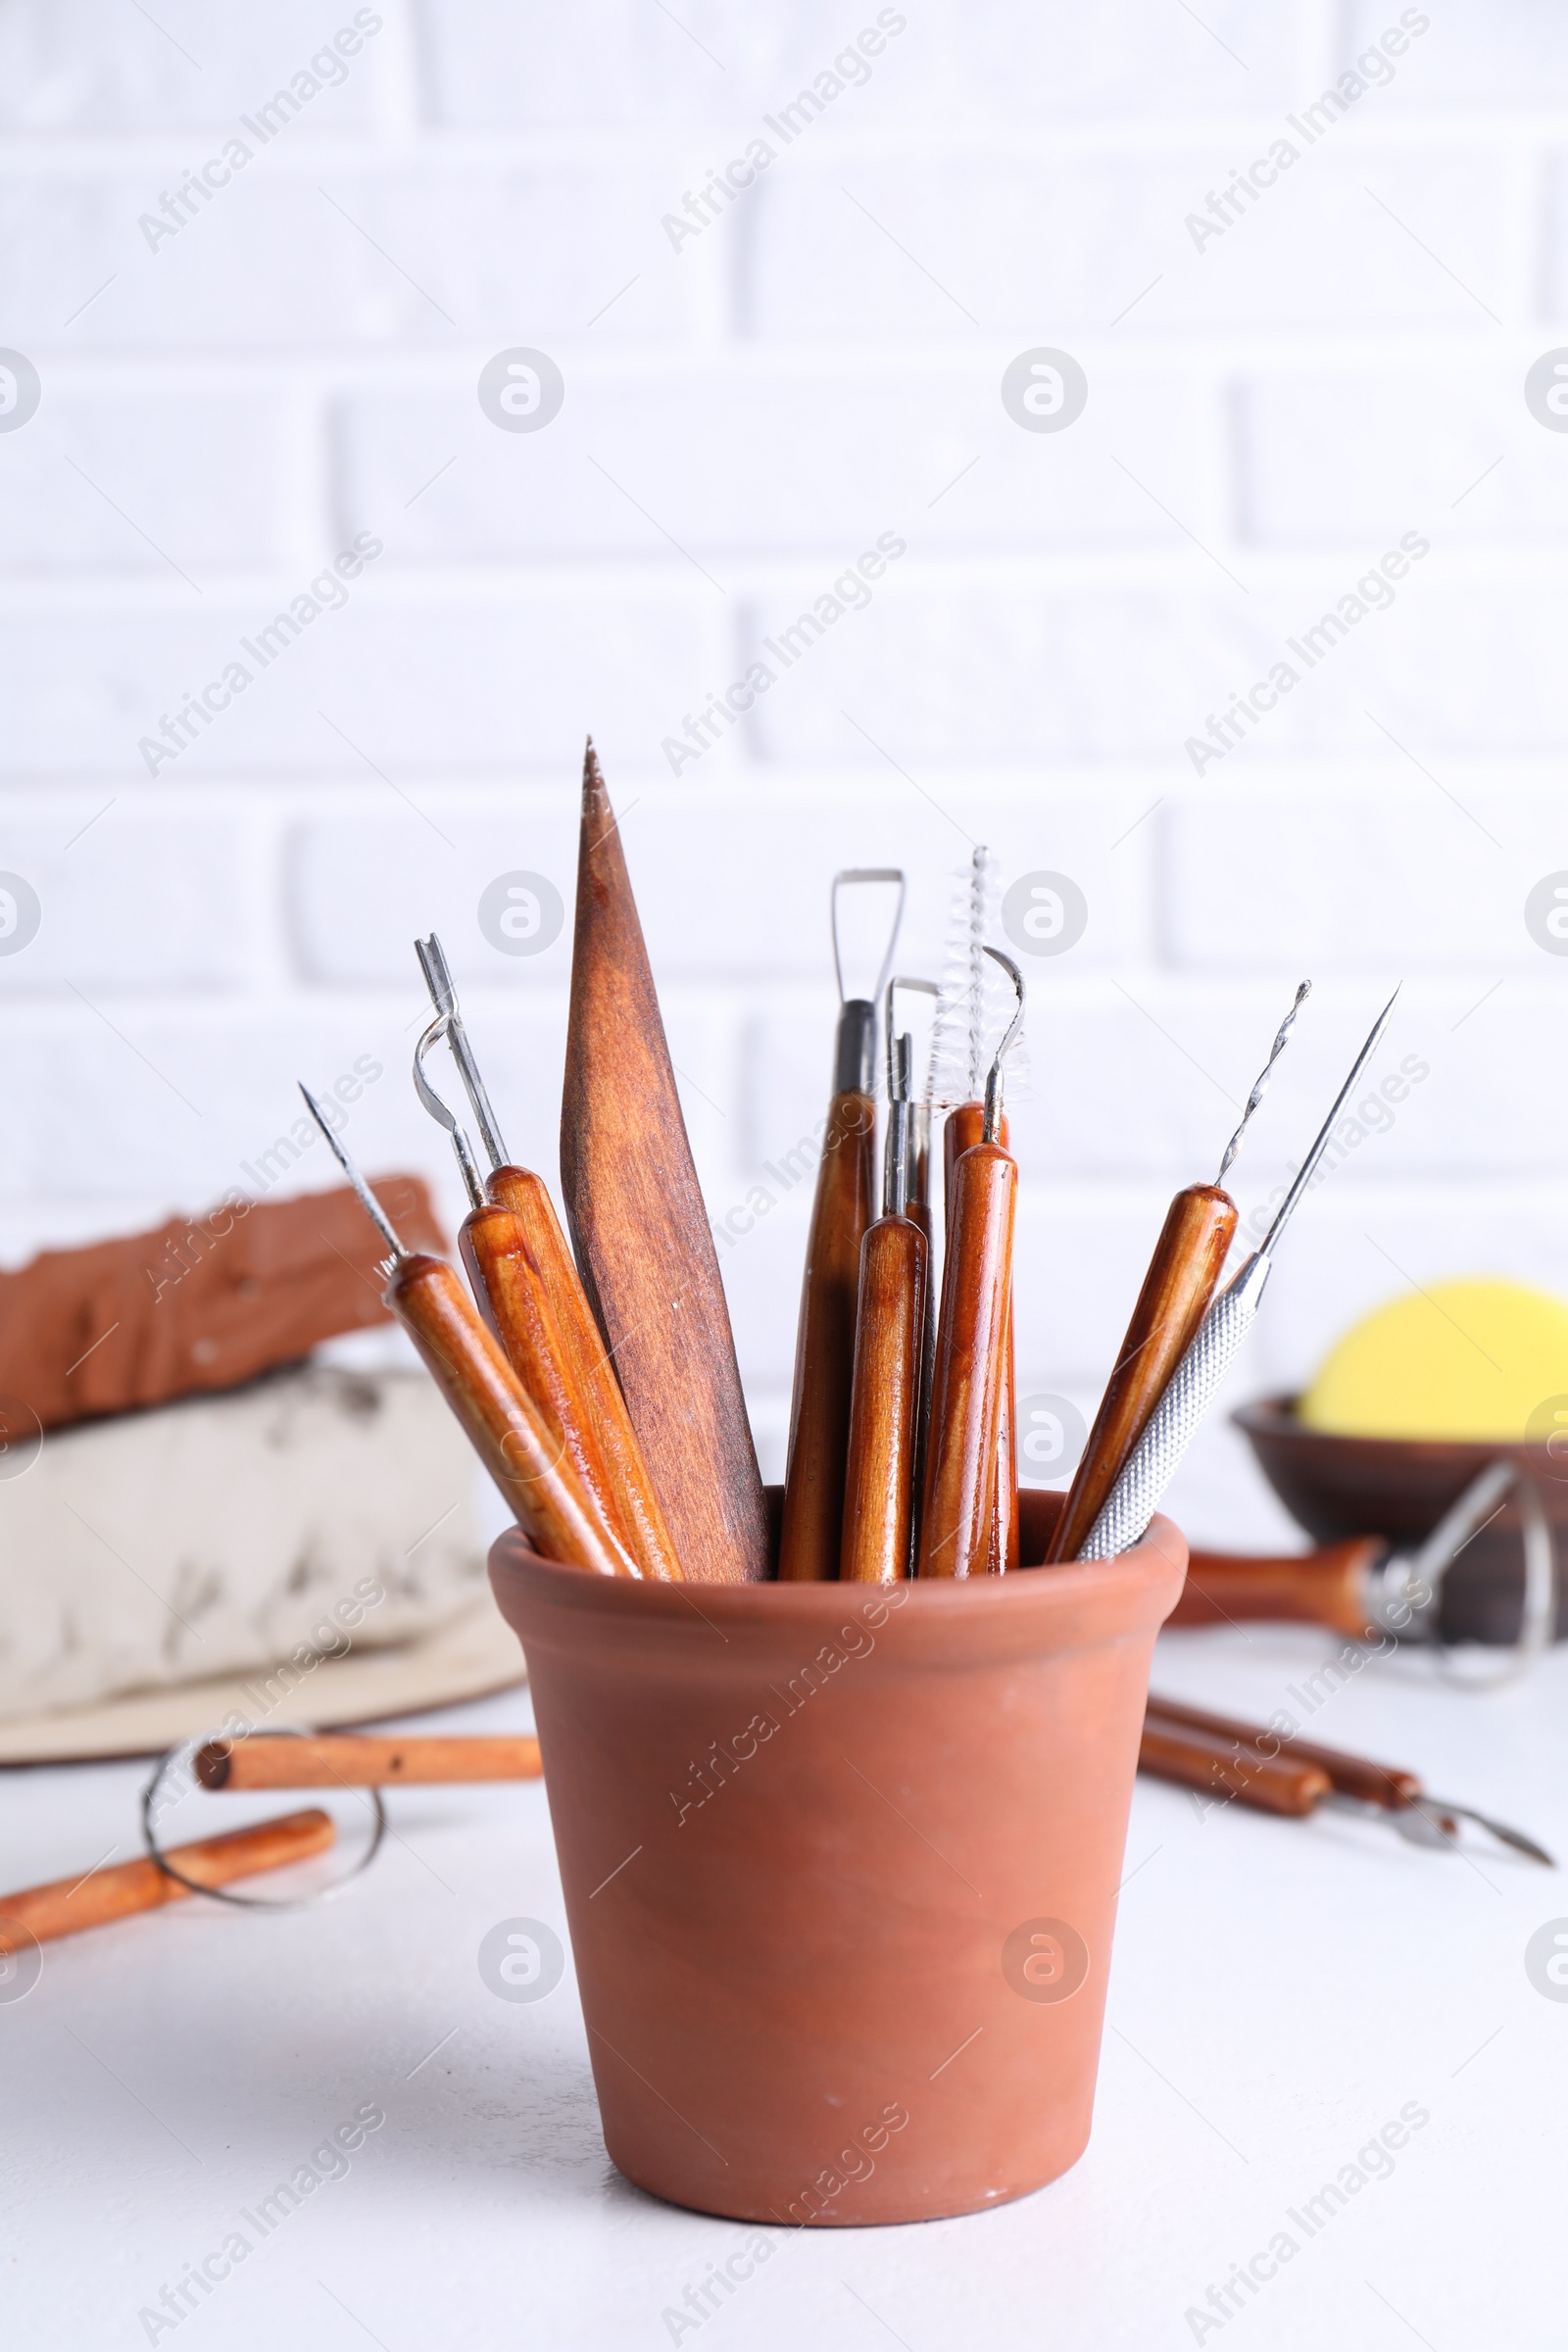 Photo of Clay and set of crafting tools on white textured table against brick wall, closeup